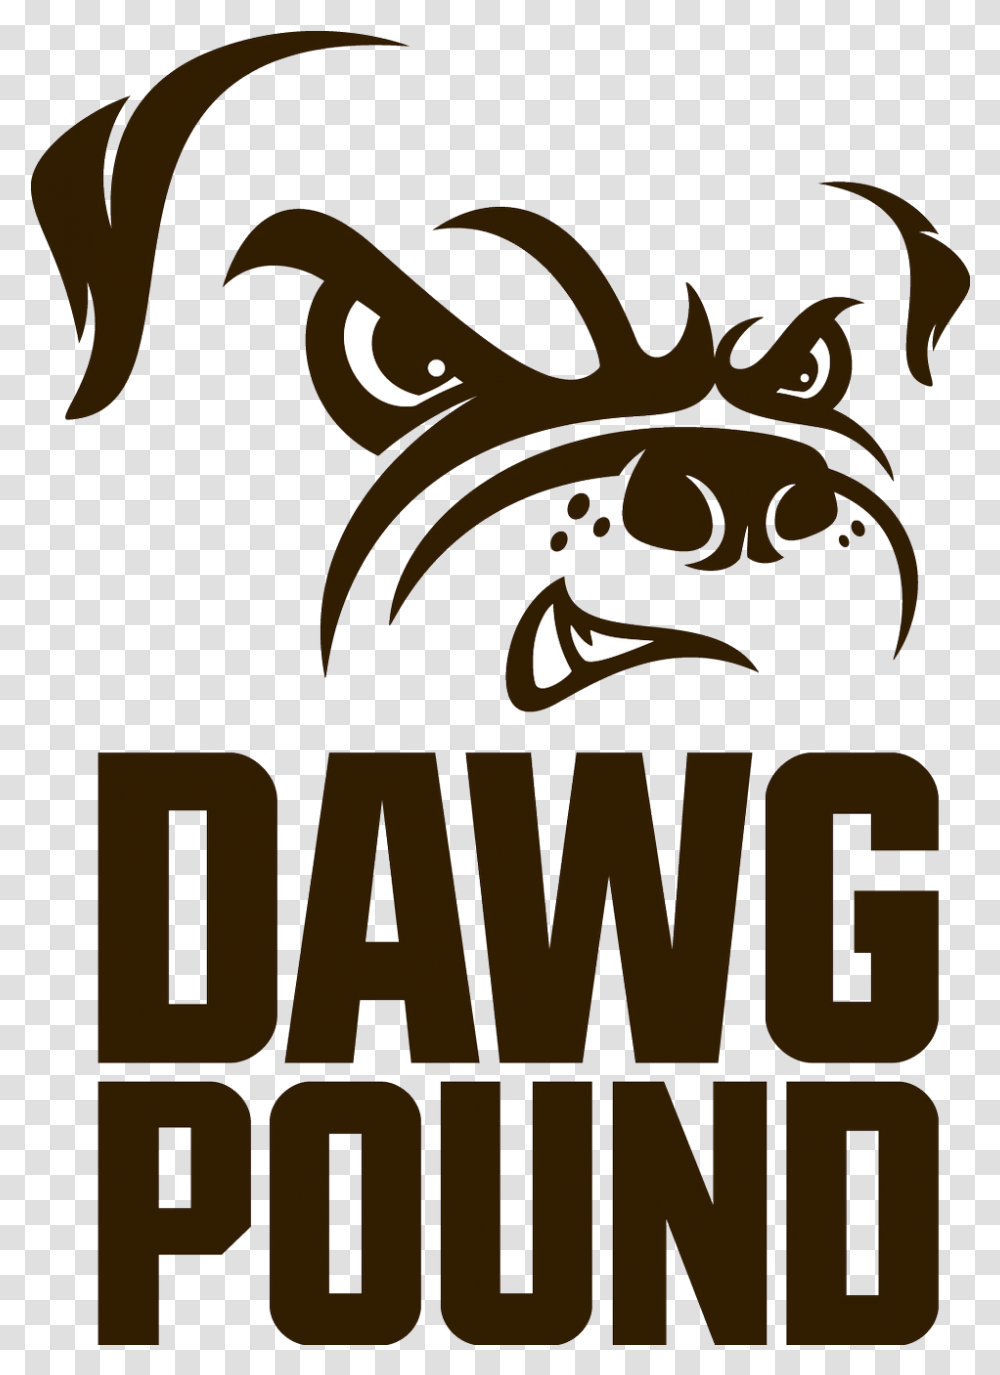 Cleveland Browns Dawg Pound Decal Logo Cleveland Browns Dawg Pound, Dragon, Text, Word, Crowd Transparent Png